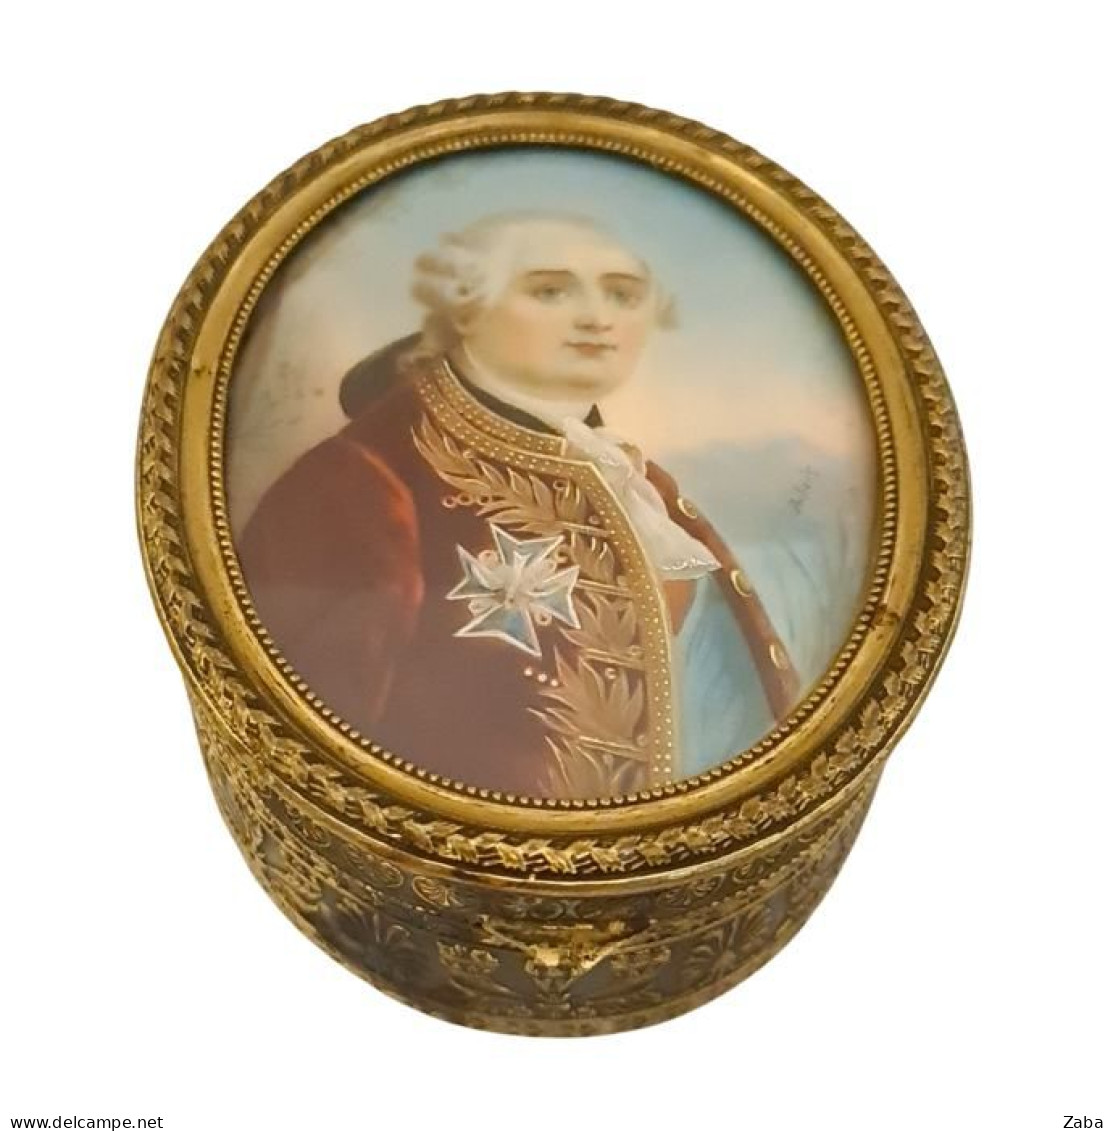 French King LOUIS XVI Yewelry Box, Signed & Painted by FREDERIC DUBOIS.